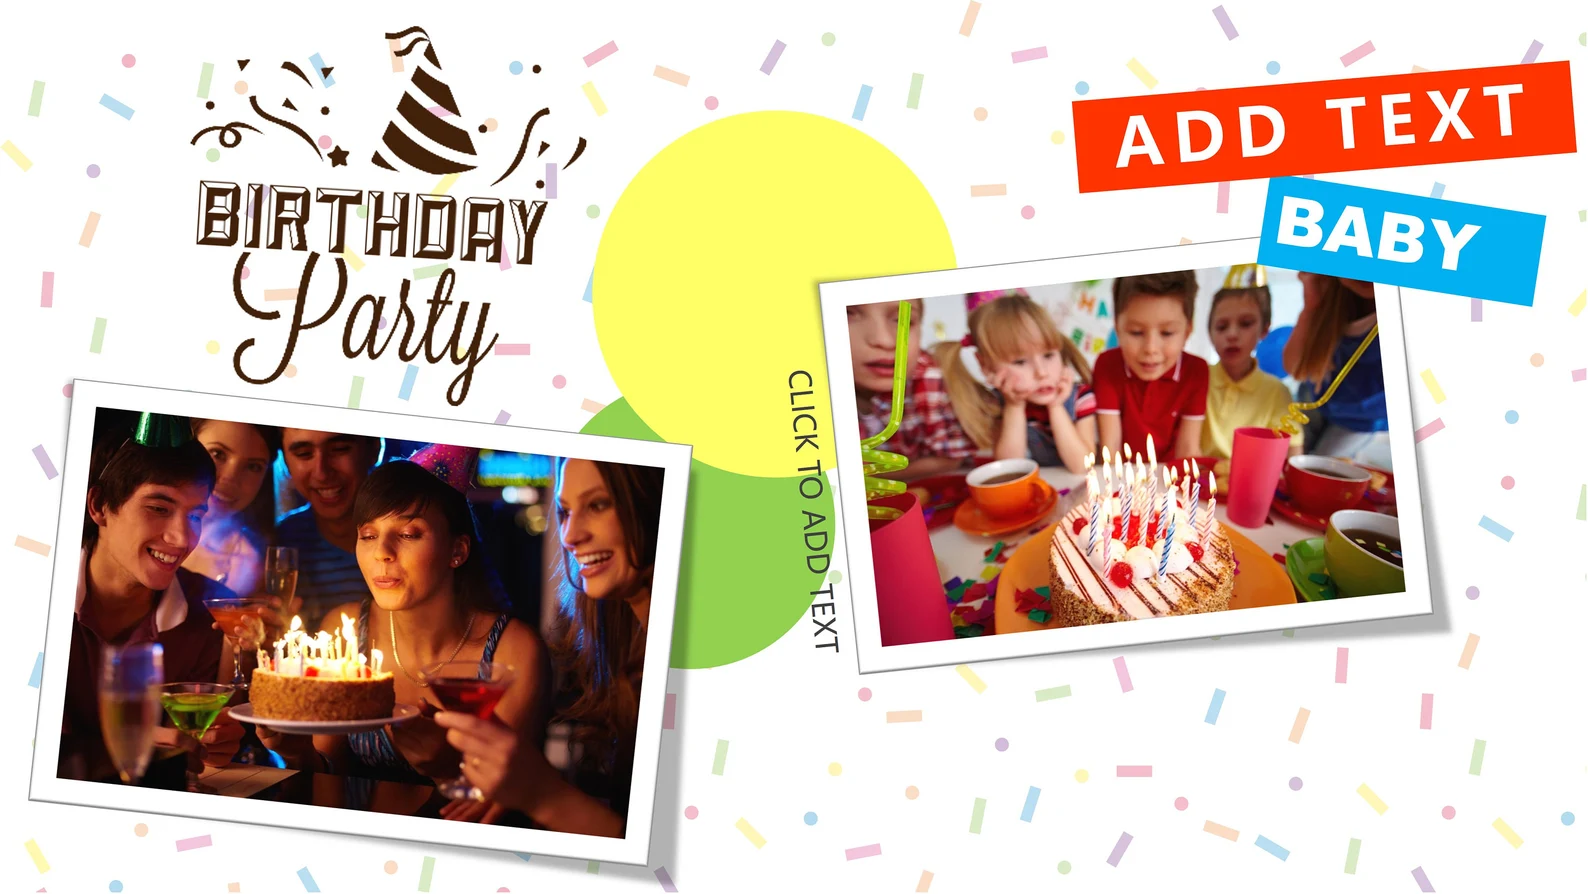 Use this greeting cards for the birthday of your child.